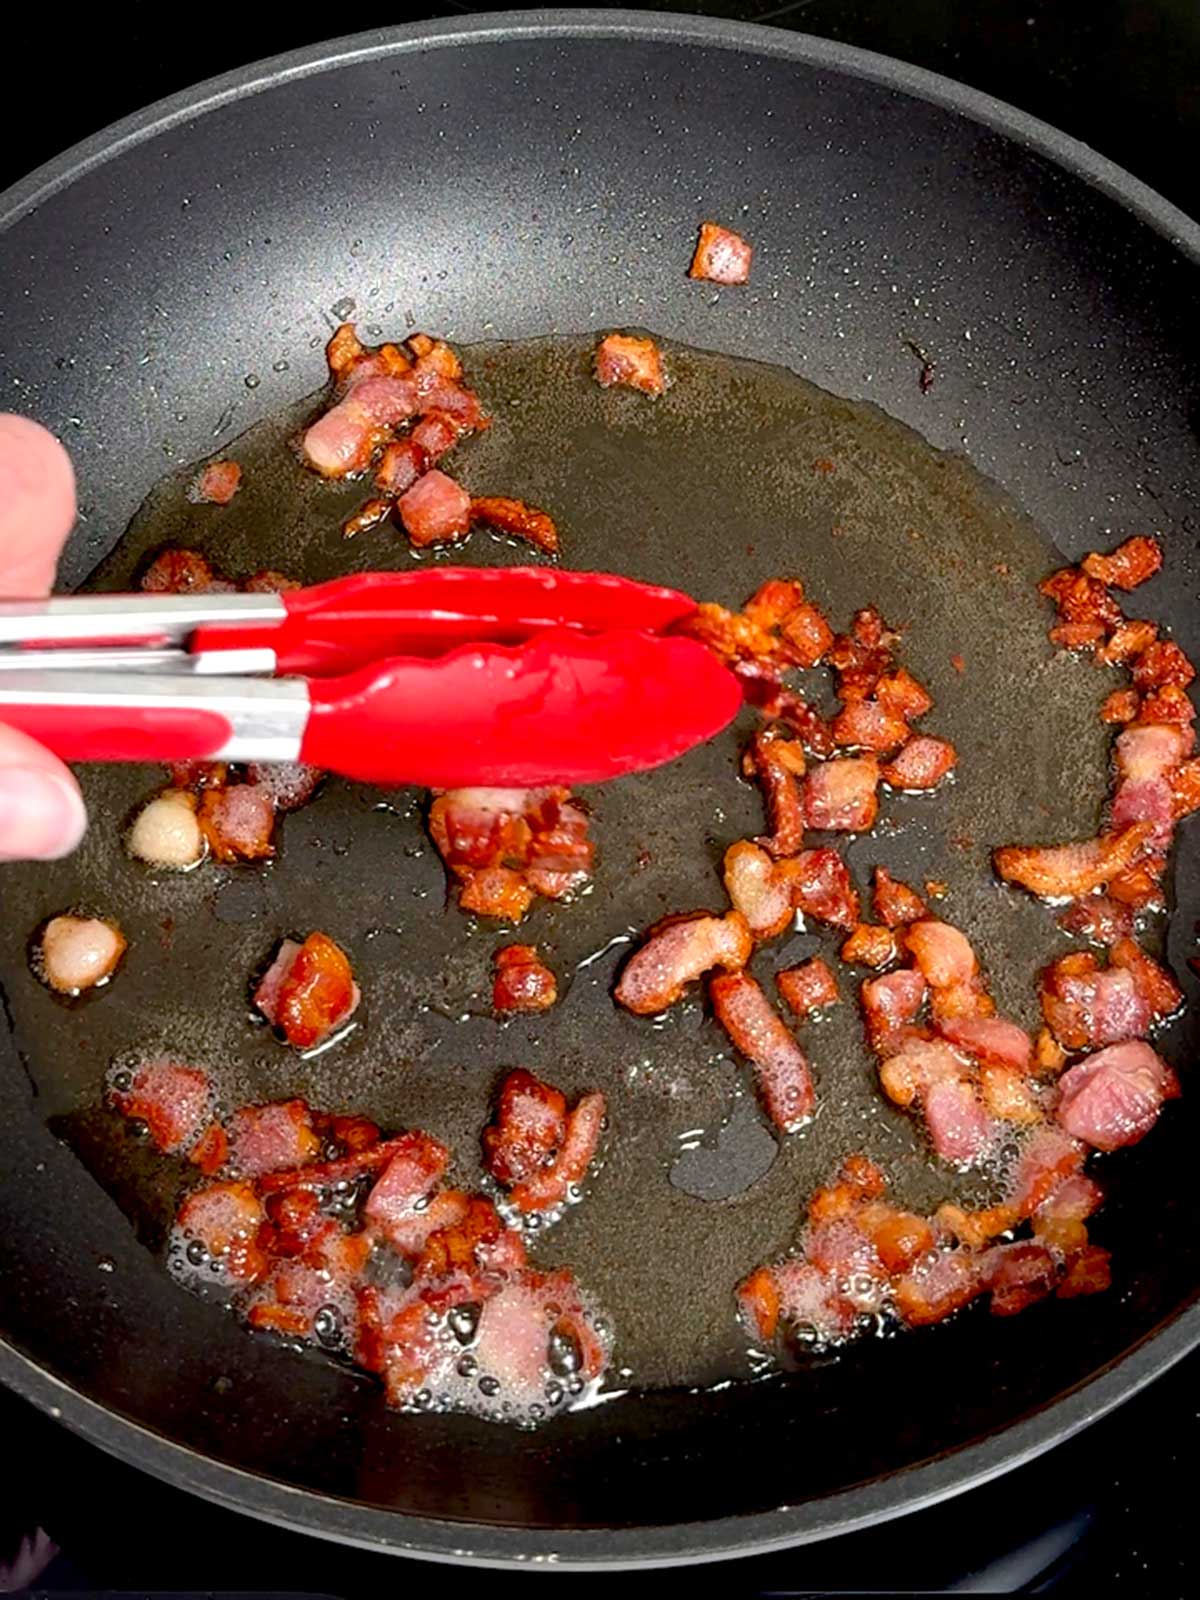 Removing cooked bacon from the skillet to drain.